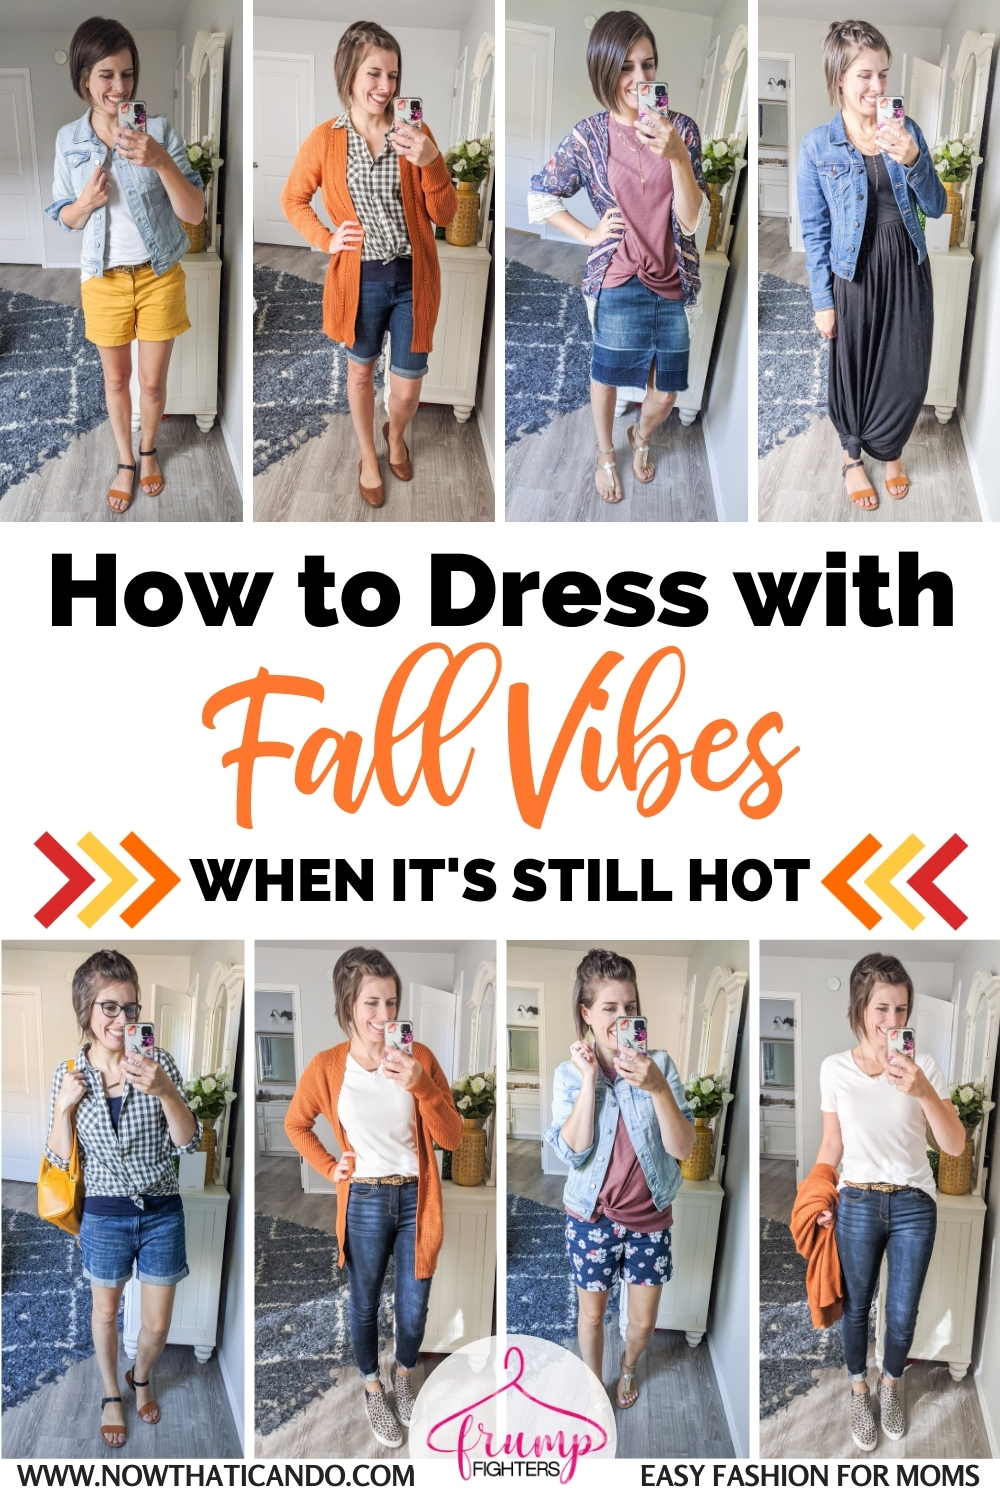 How To Use Summer Pieces With Fall
Outfits